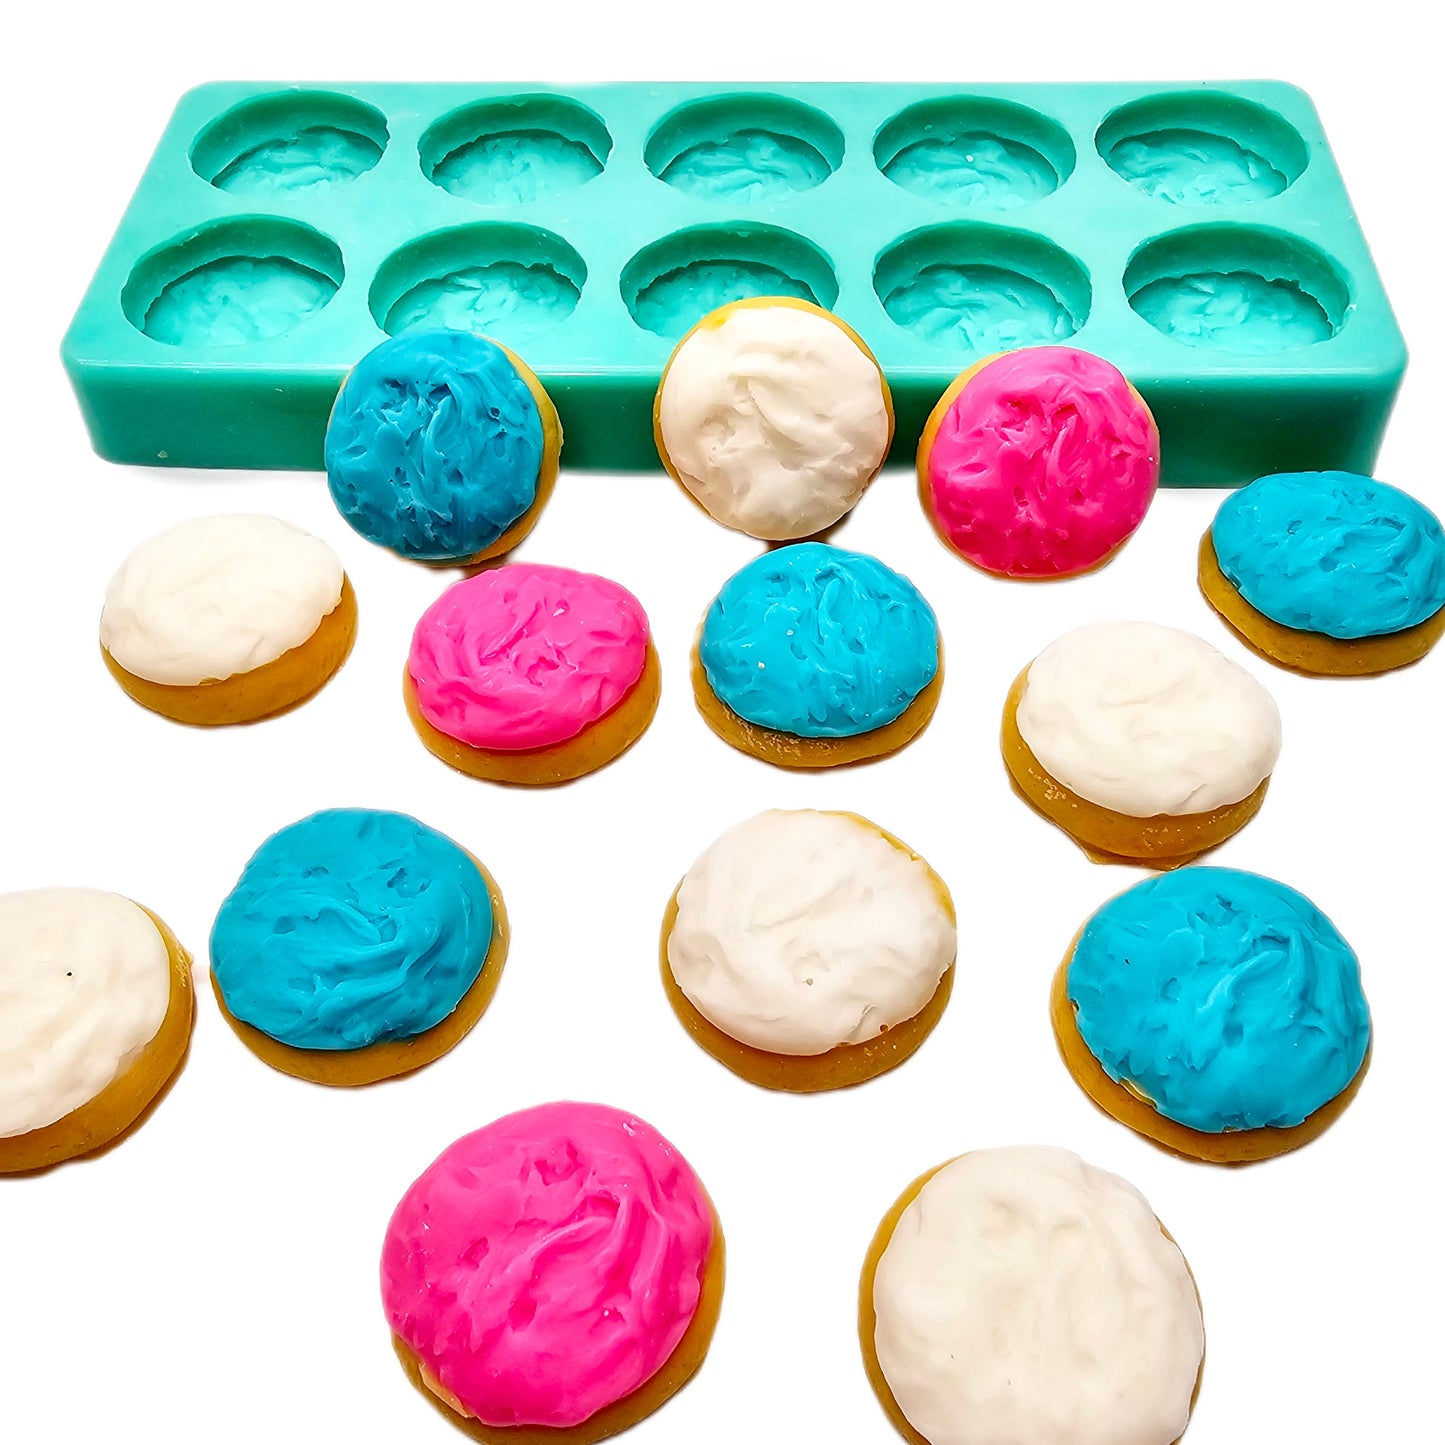 10 Cavities Mini Frosted Cookies Candle Silicone Mold, Soap mold, Mold for Wax, Mold for Resin, sugar cookie wax melts mold NC102